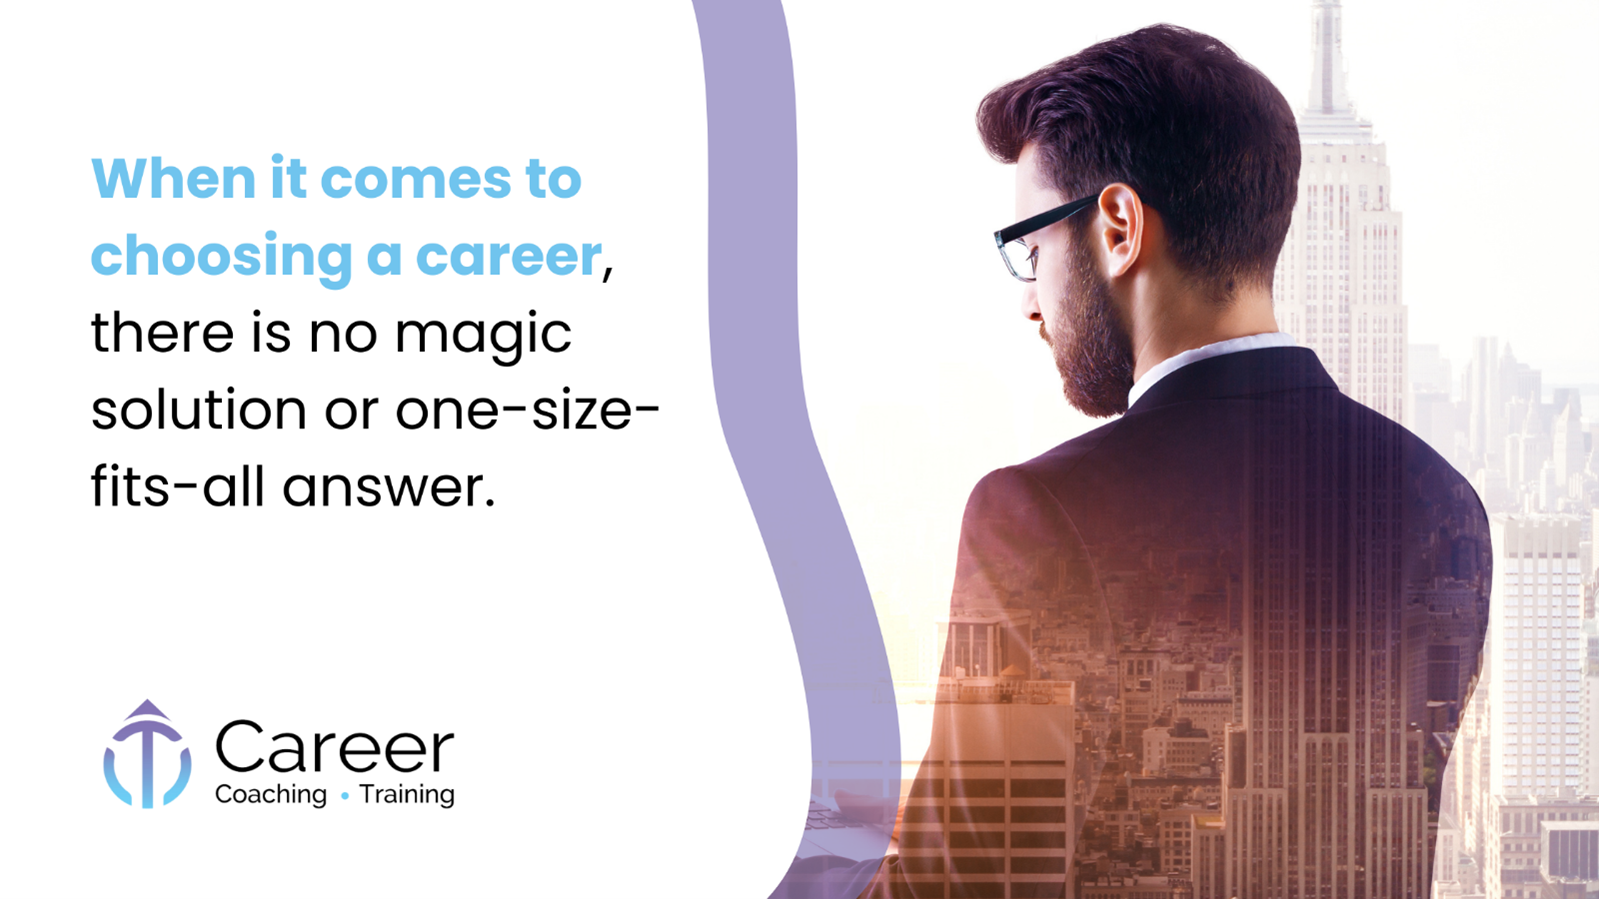 When it comes to choosing a career, there is no magic solution or one-size-fits-all answer.